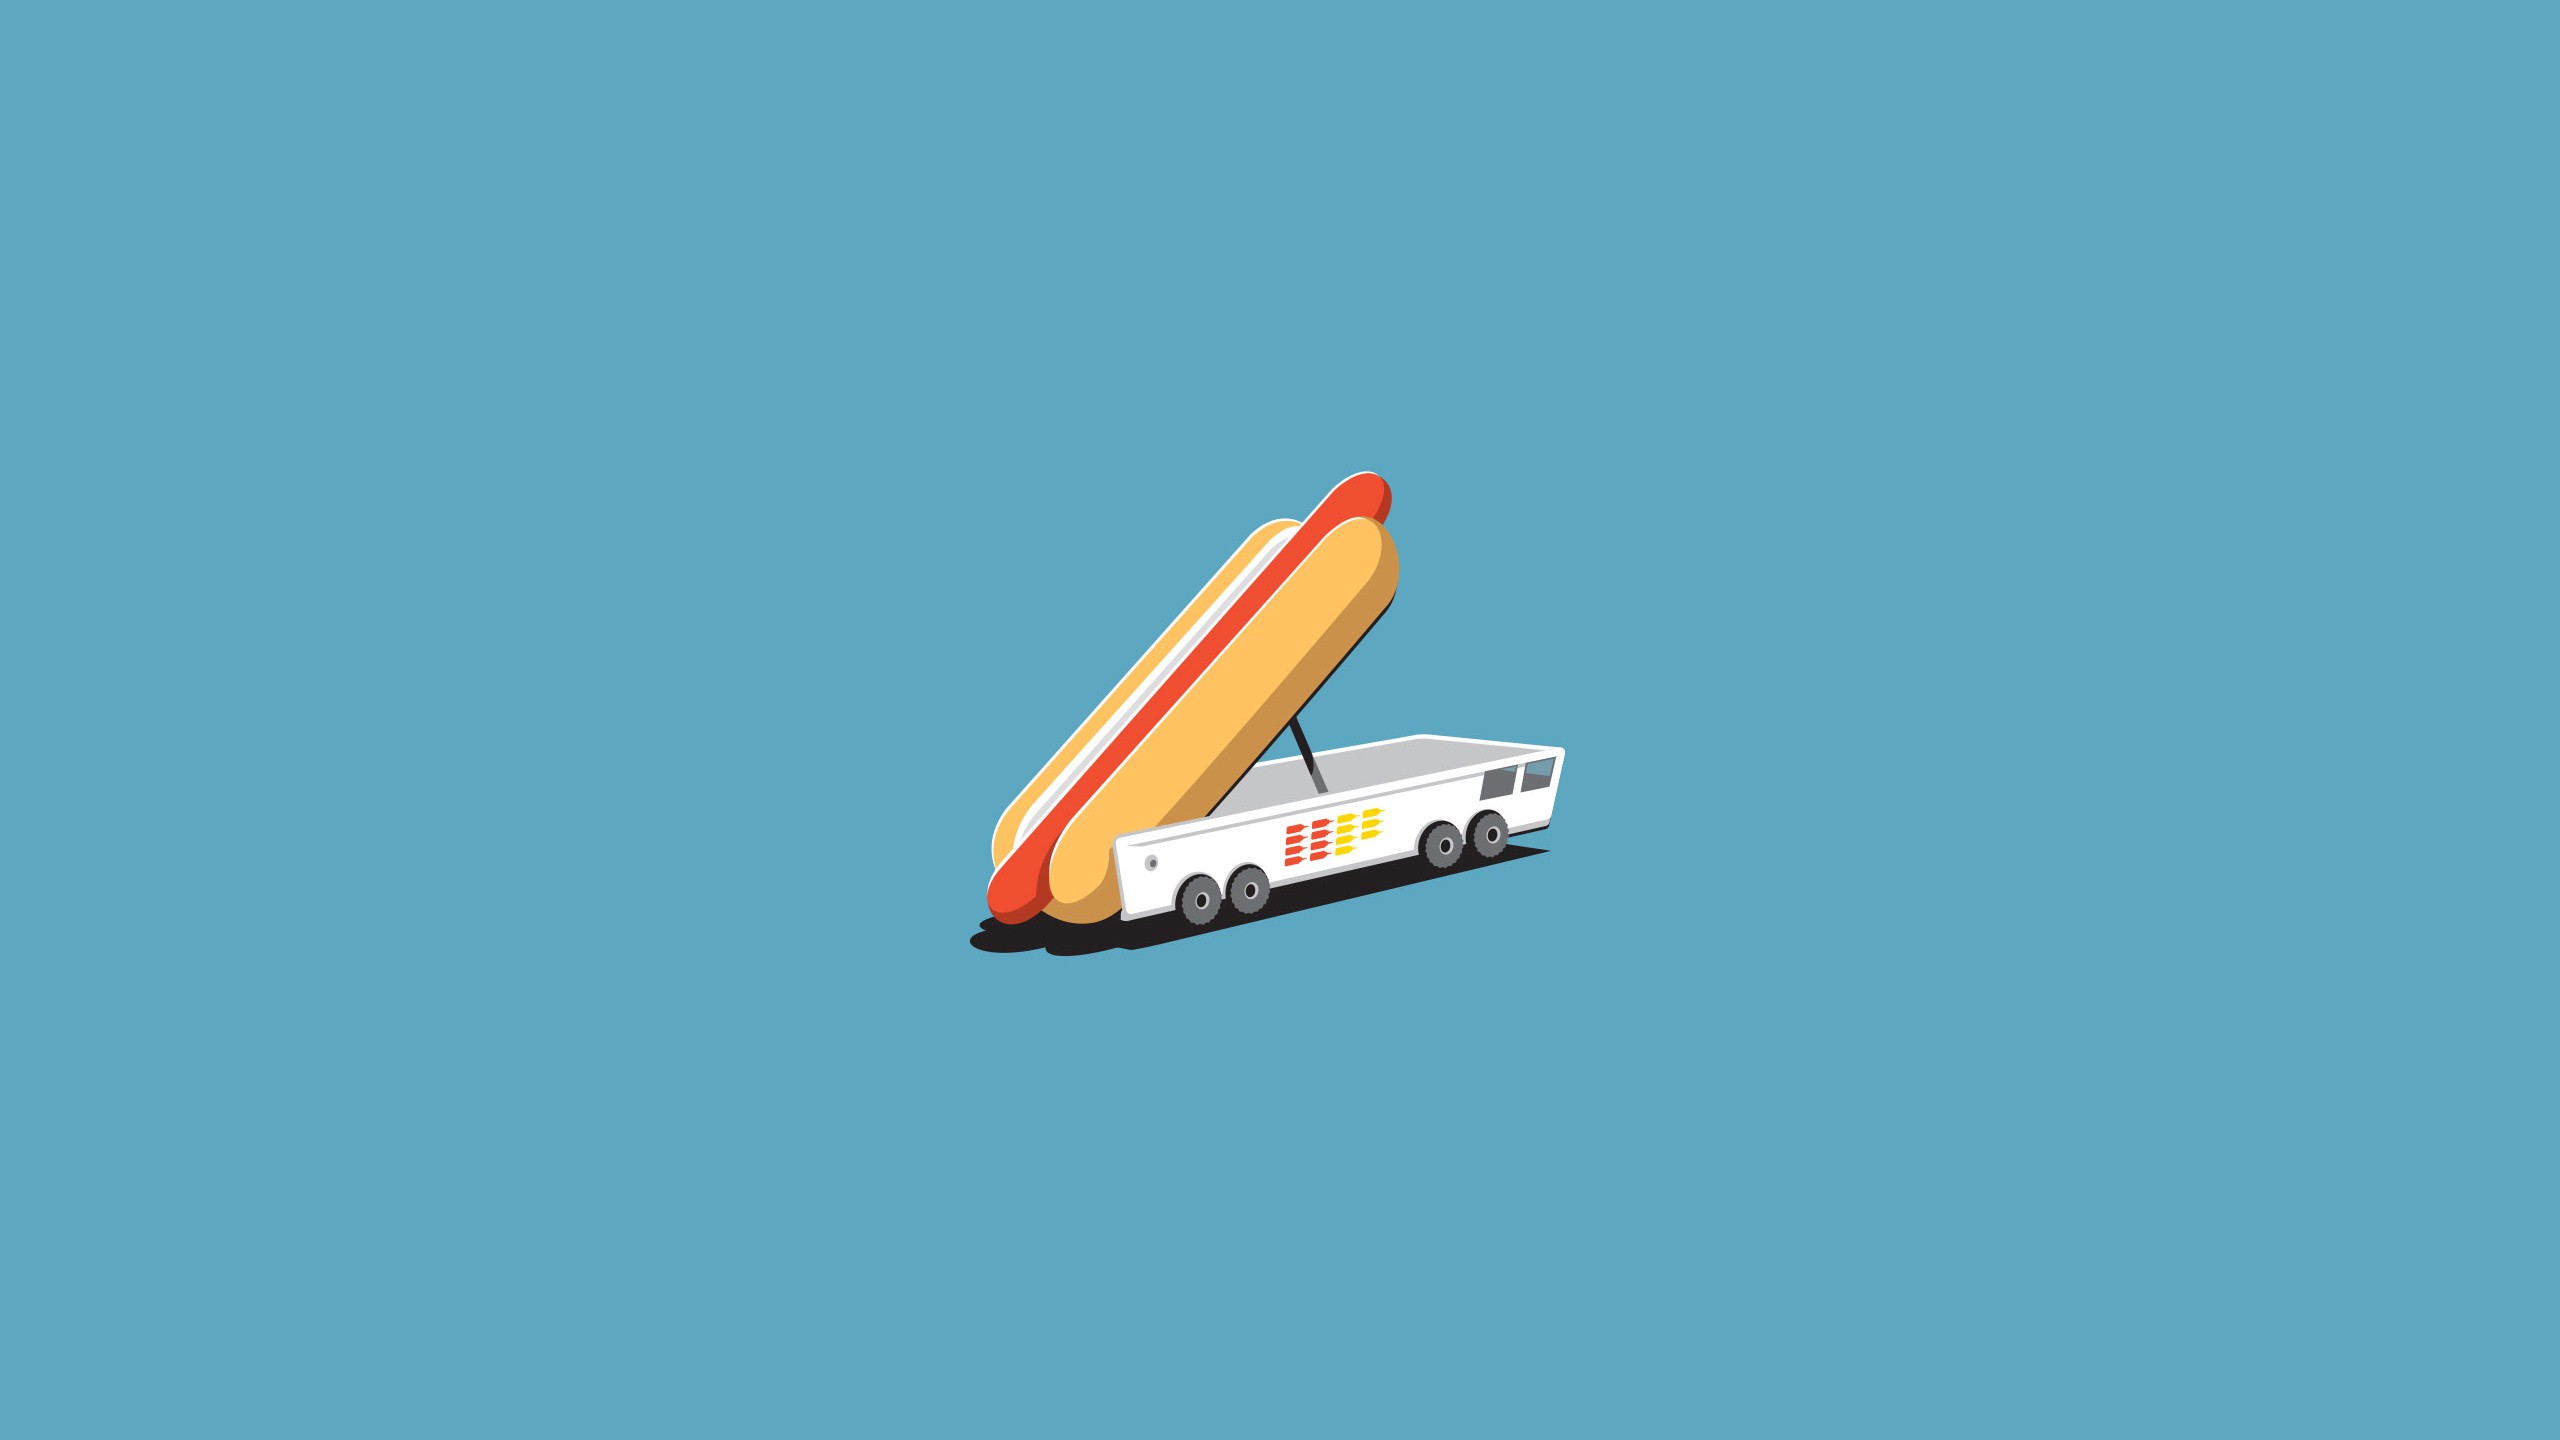 General 2560x1440 hot dogs missiles humor cyan background car vehicle food simple background